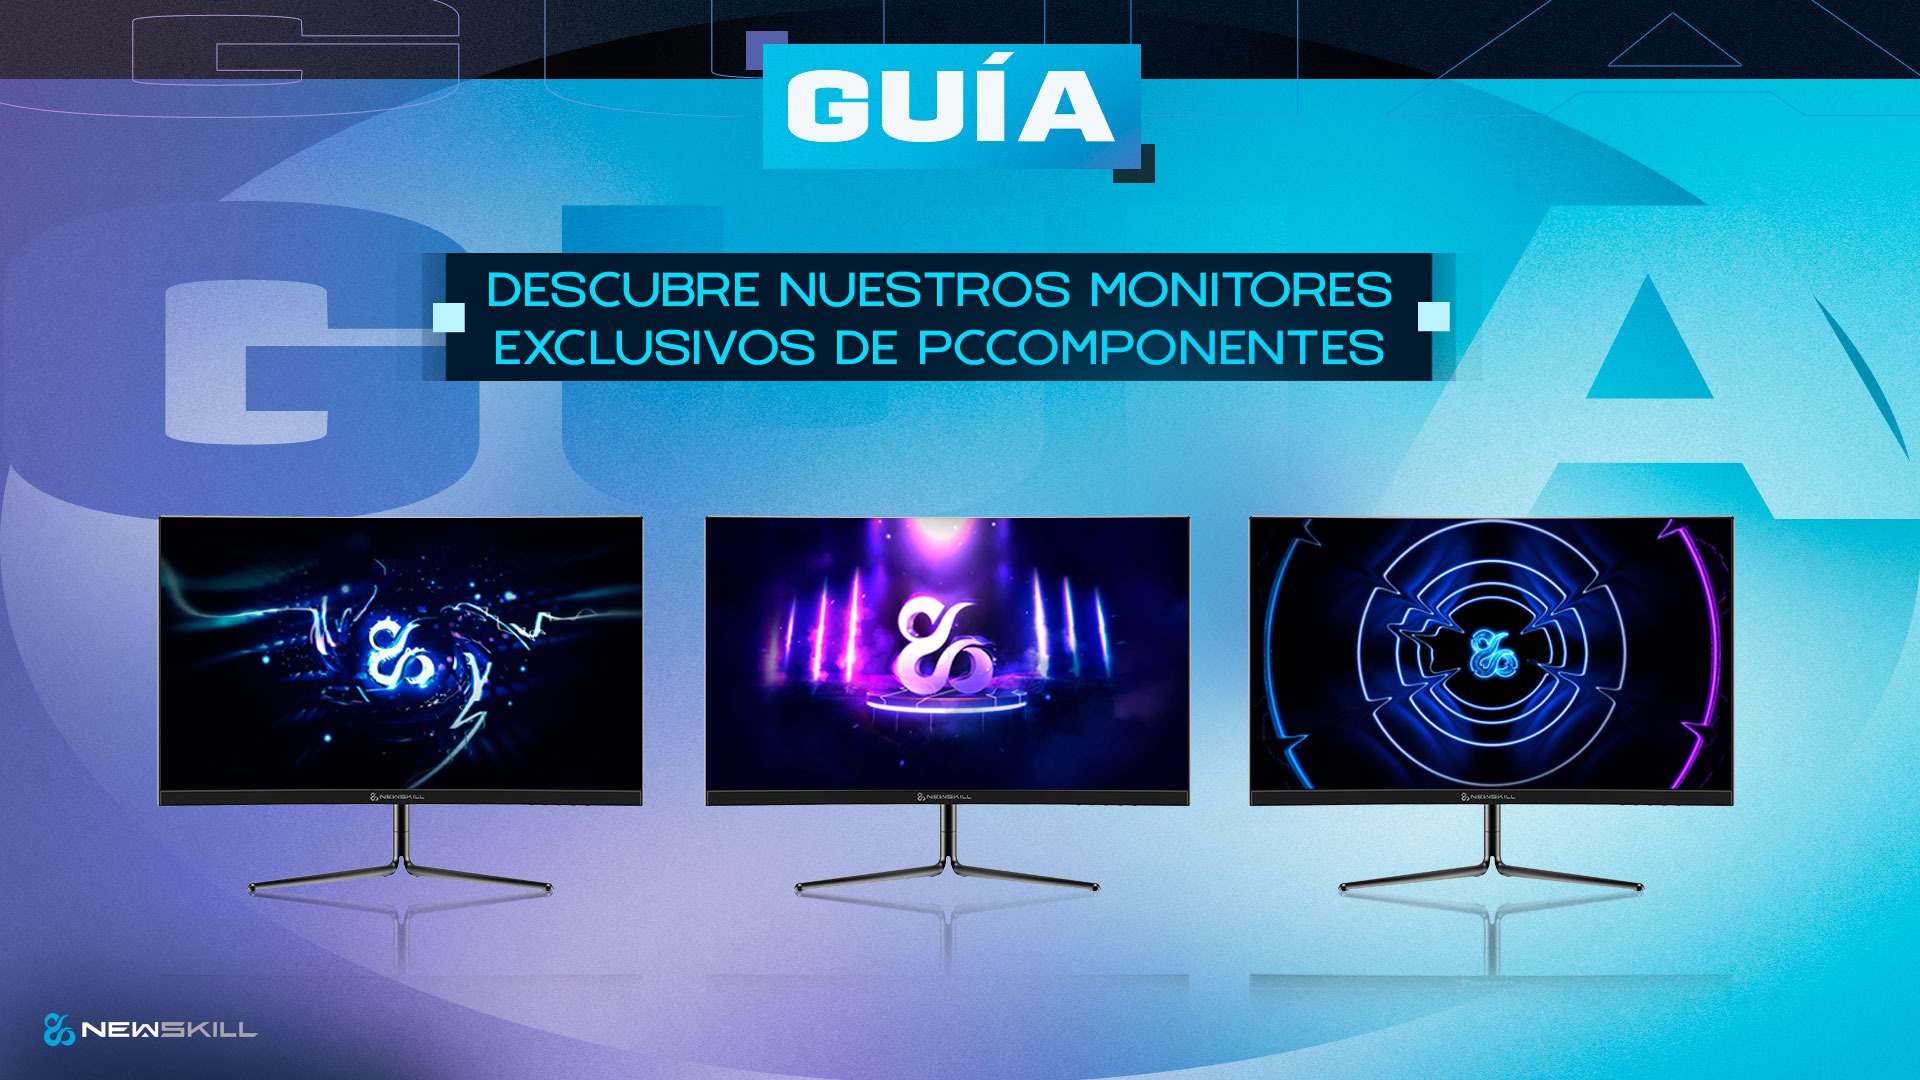 Discover our exclusive monitors from PcComponents